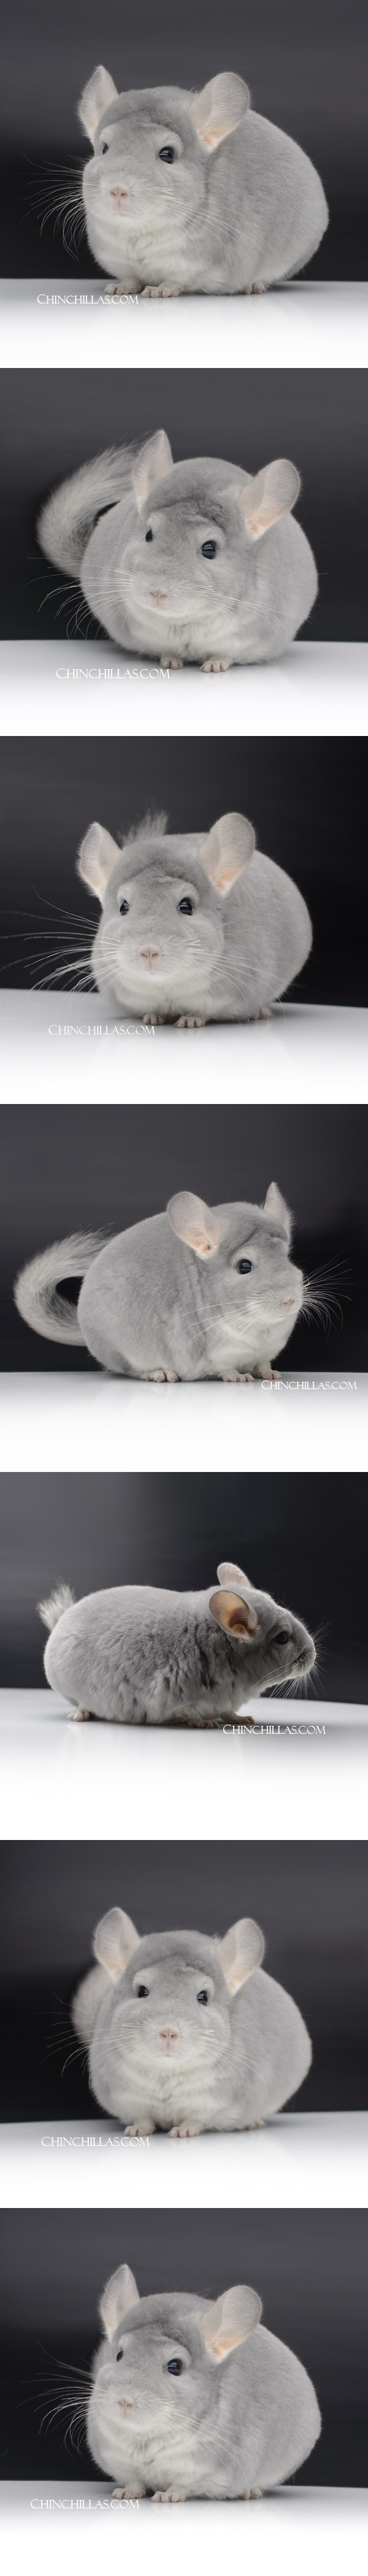 Chinchilla or related item offered for sale or export on Chinchillas.com - 000032 Large Premium Production Quality Blue Diamond Female Chinchilla